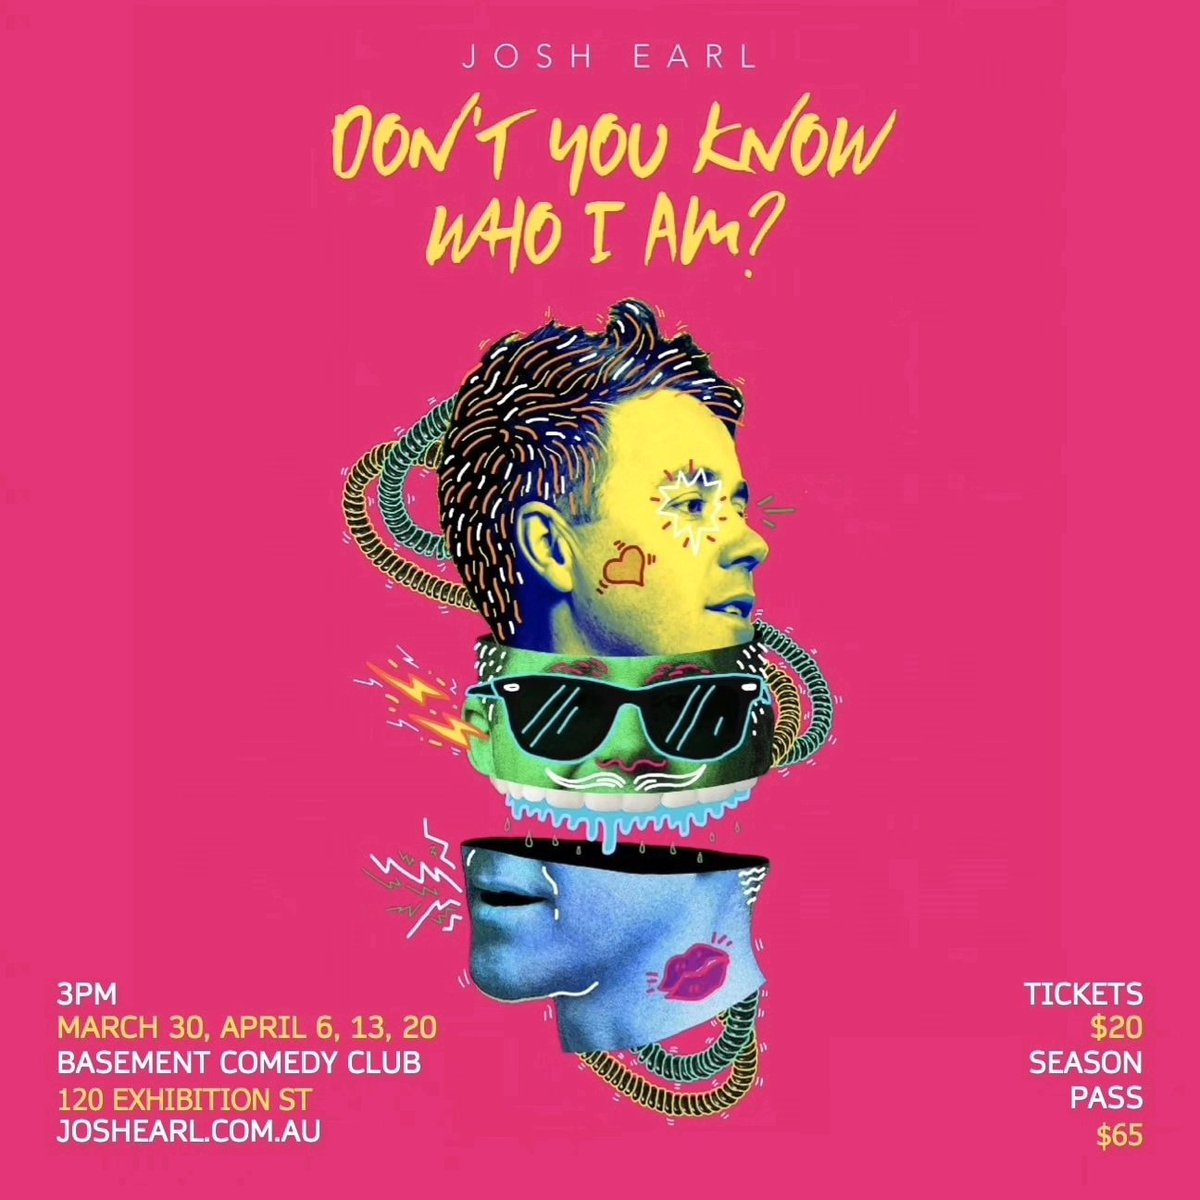 Melbourne, this Saturday at 3pm, a brand new Don't You Know Who I Am? with guests @nonstoptom (Tom Gleeson) @concettacaristo @ChloePetts and Alice Snedden. Tickets are only $20, Basement Comedy Club 120 Exhibition St Joshearl.com.au/gigs